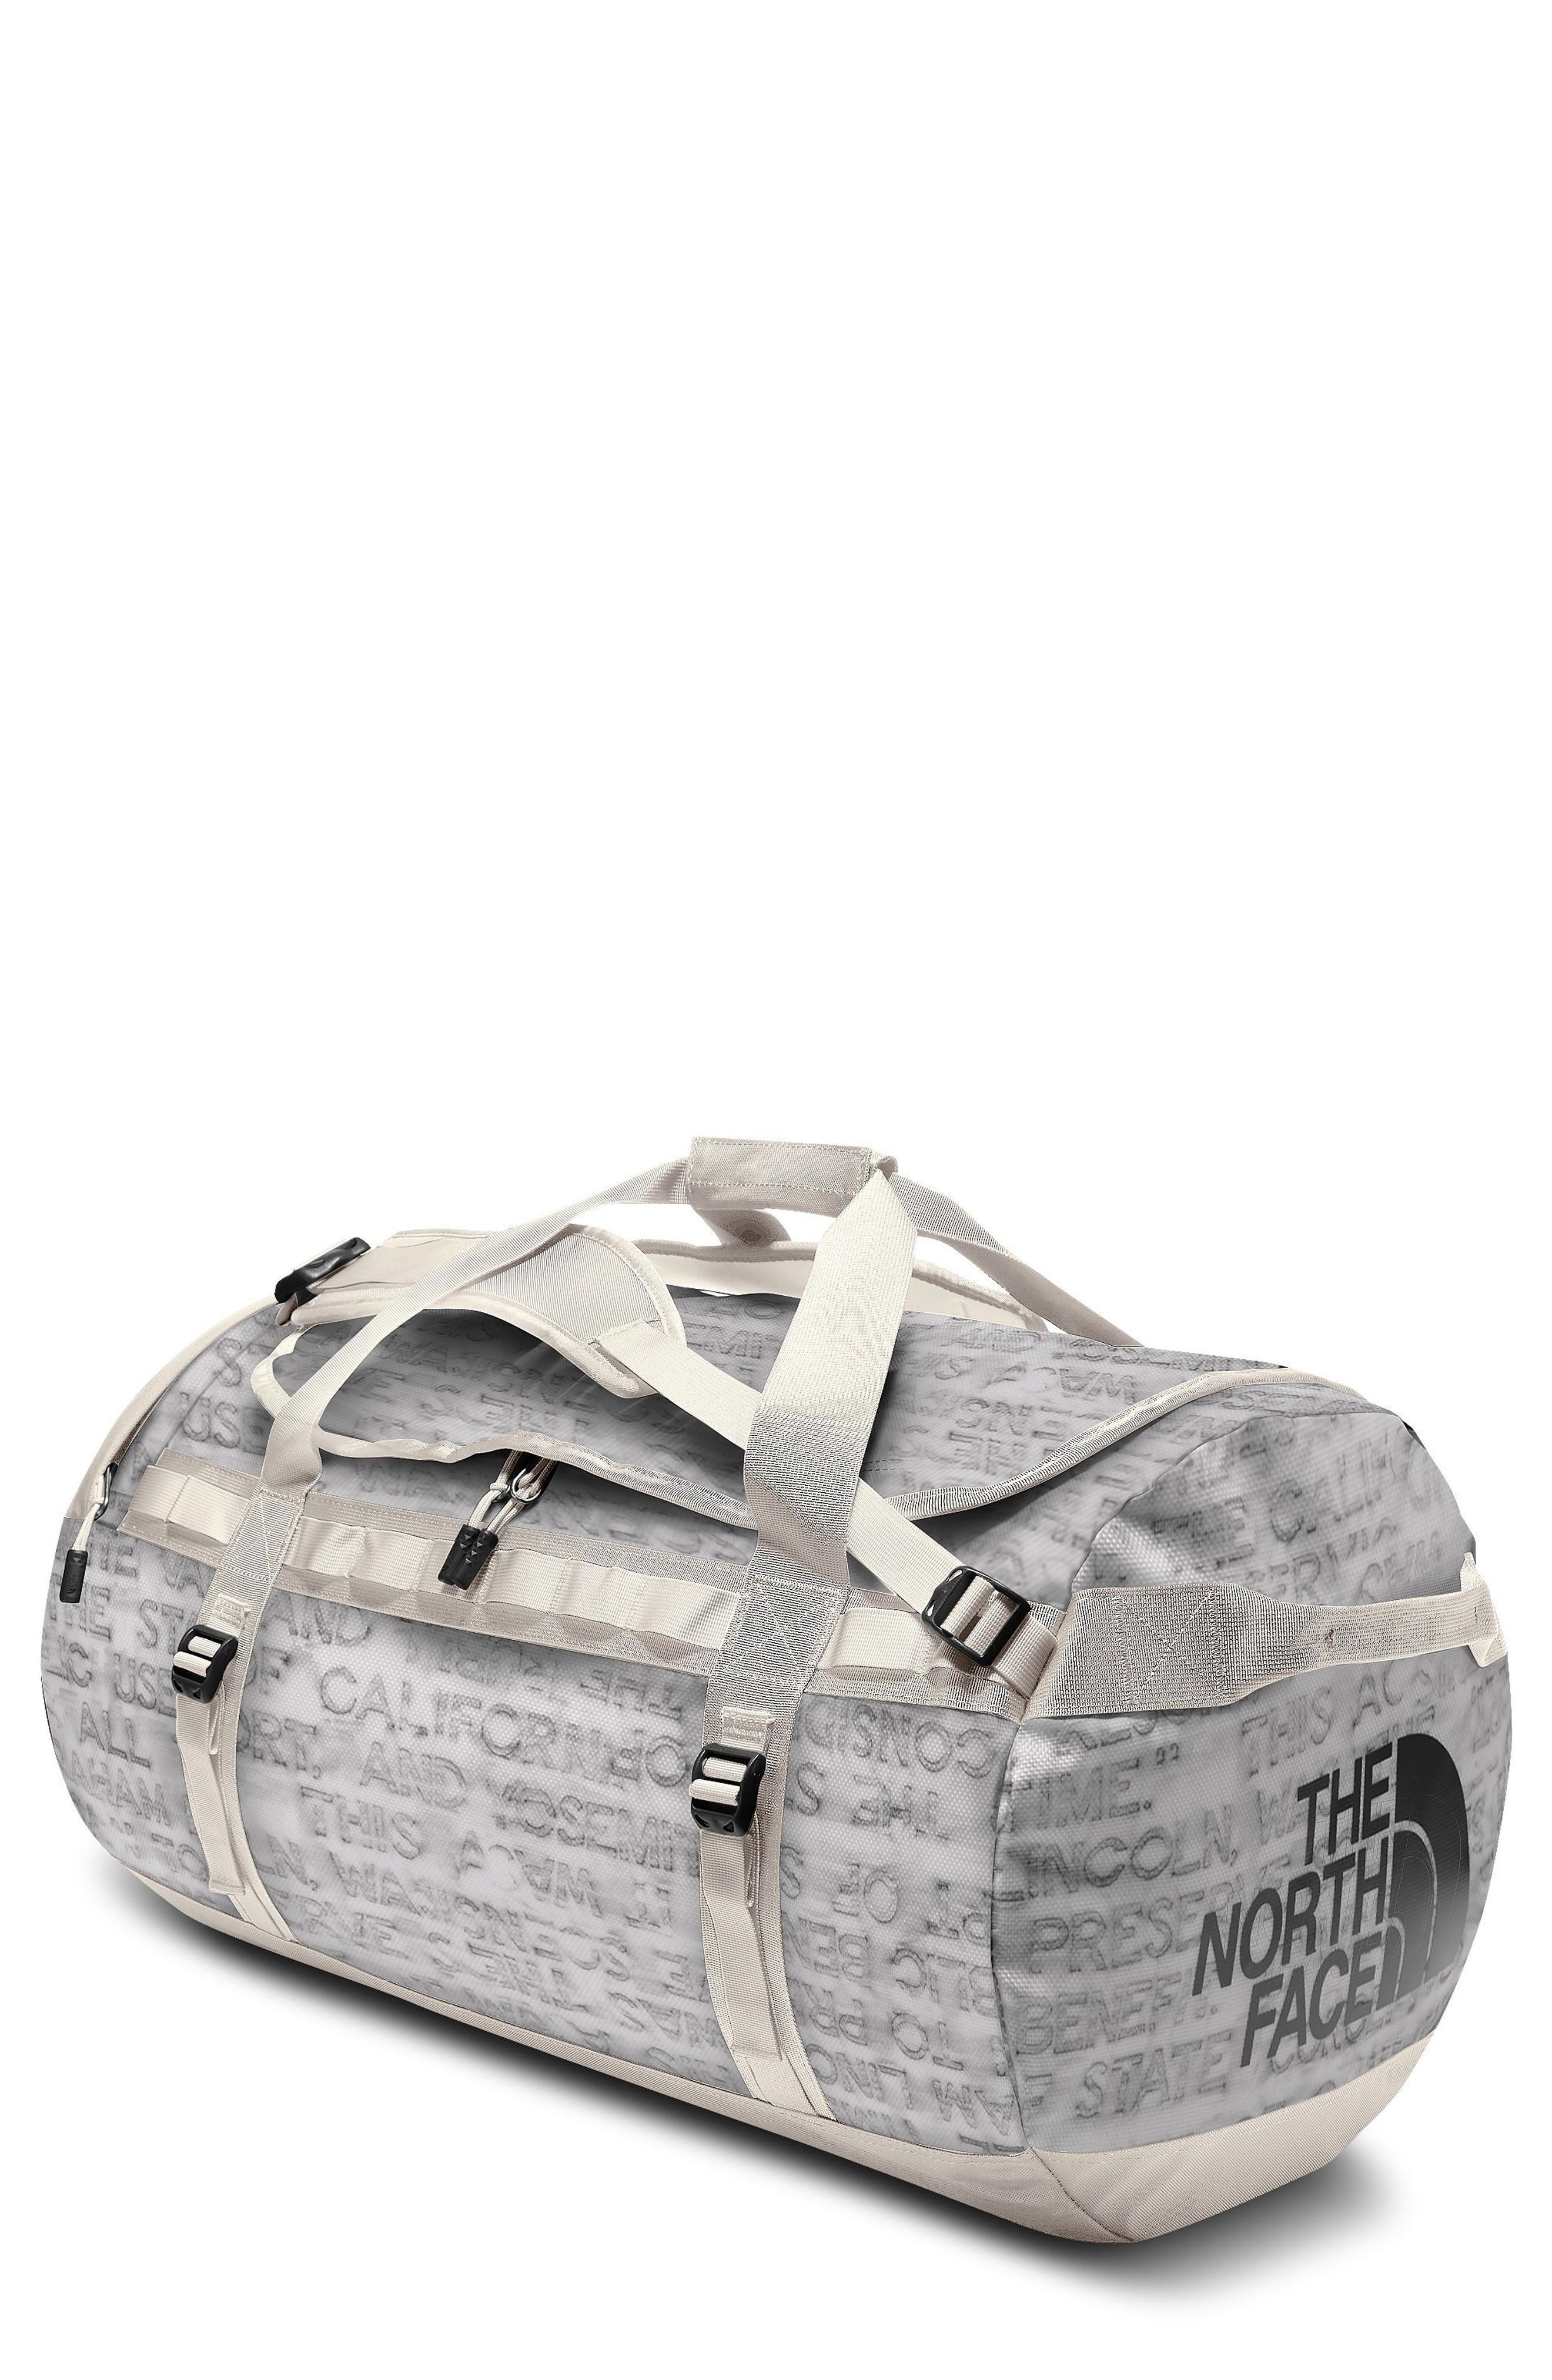 The North Face Base Camp Large Duffel Bag - White In Moonlight Ivory  Scratch Print | ModeSens